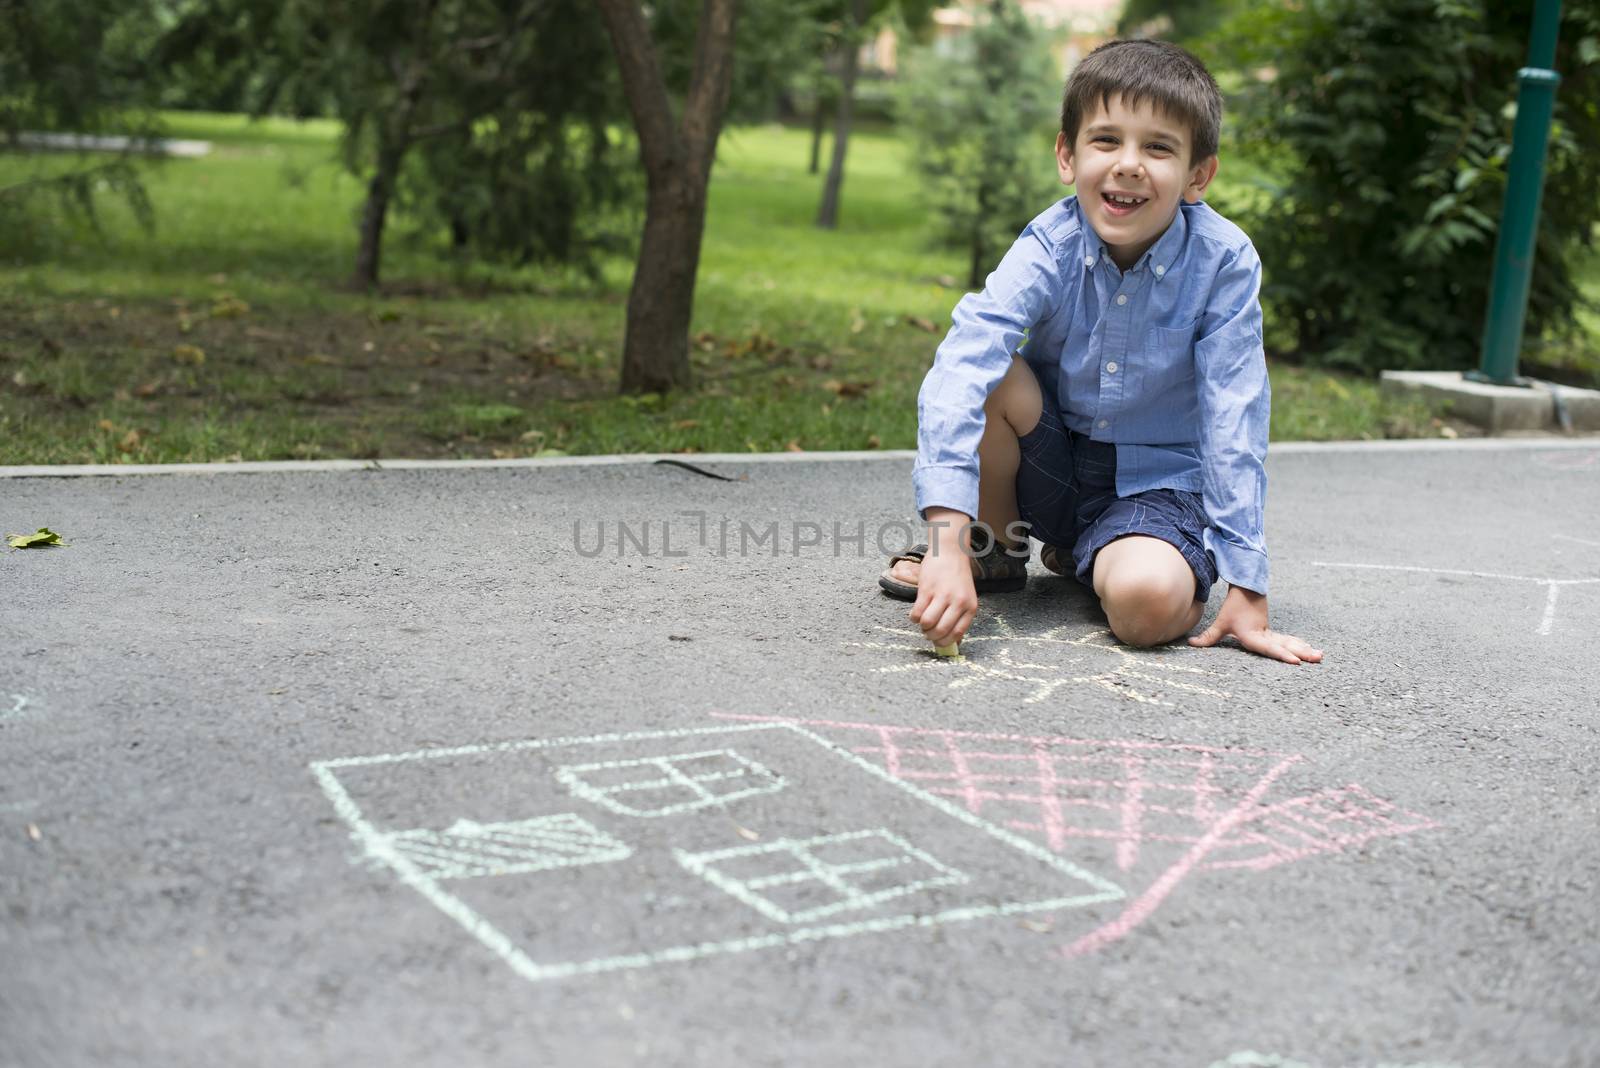 Child drawing sun and house on asphalt in a park